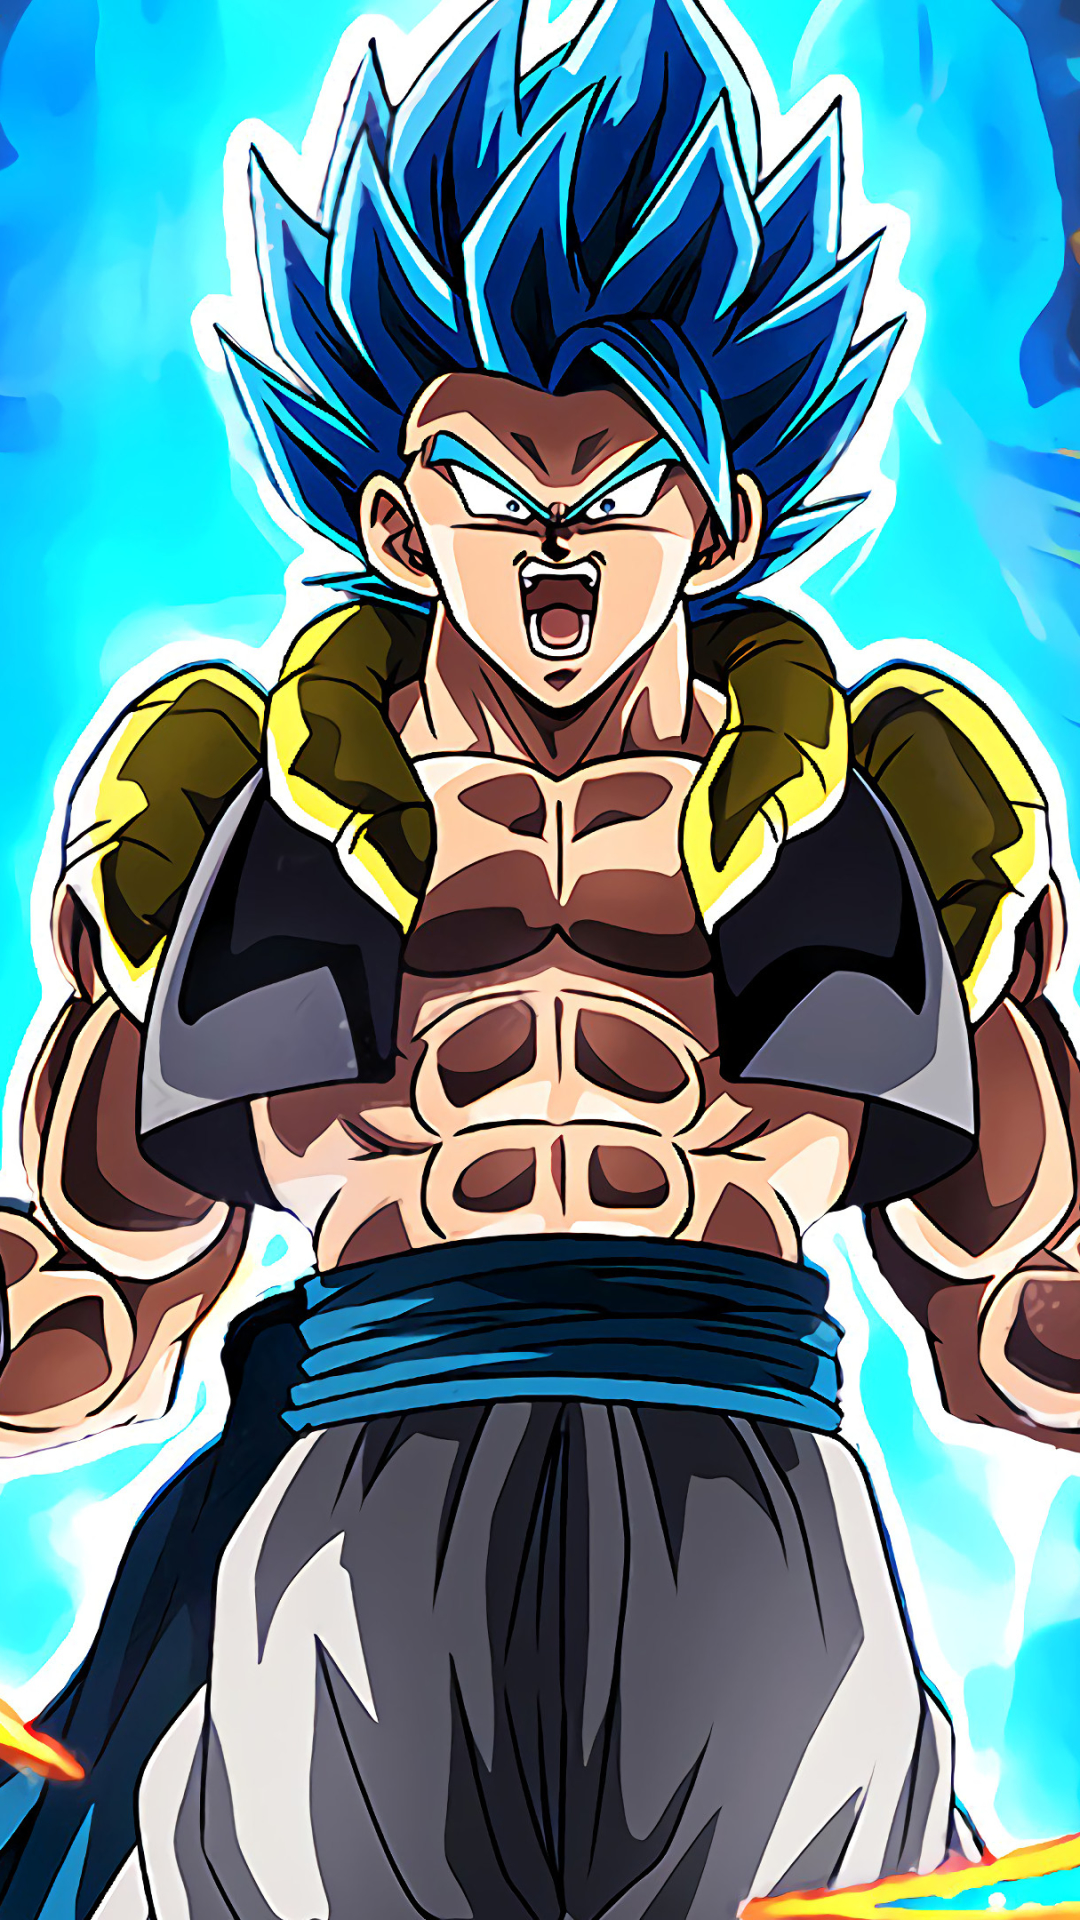 Gogeta blue - Mobile Abyss